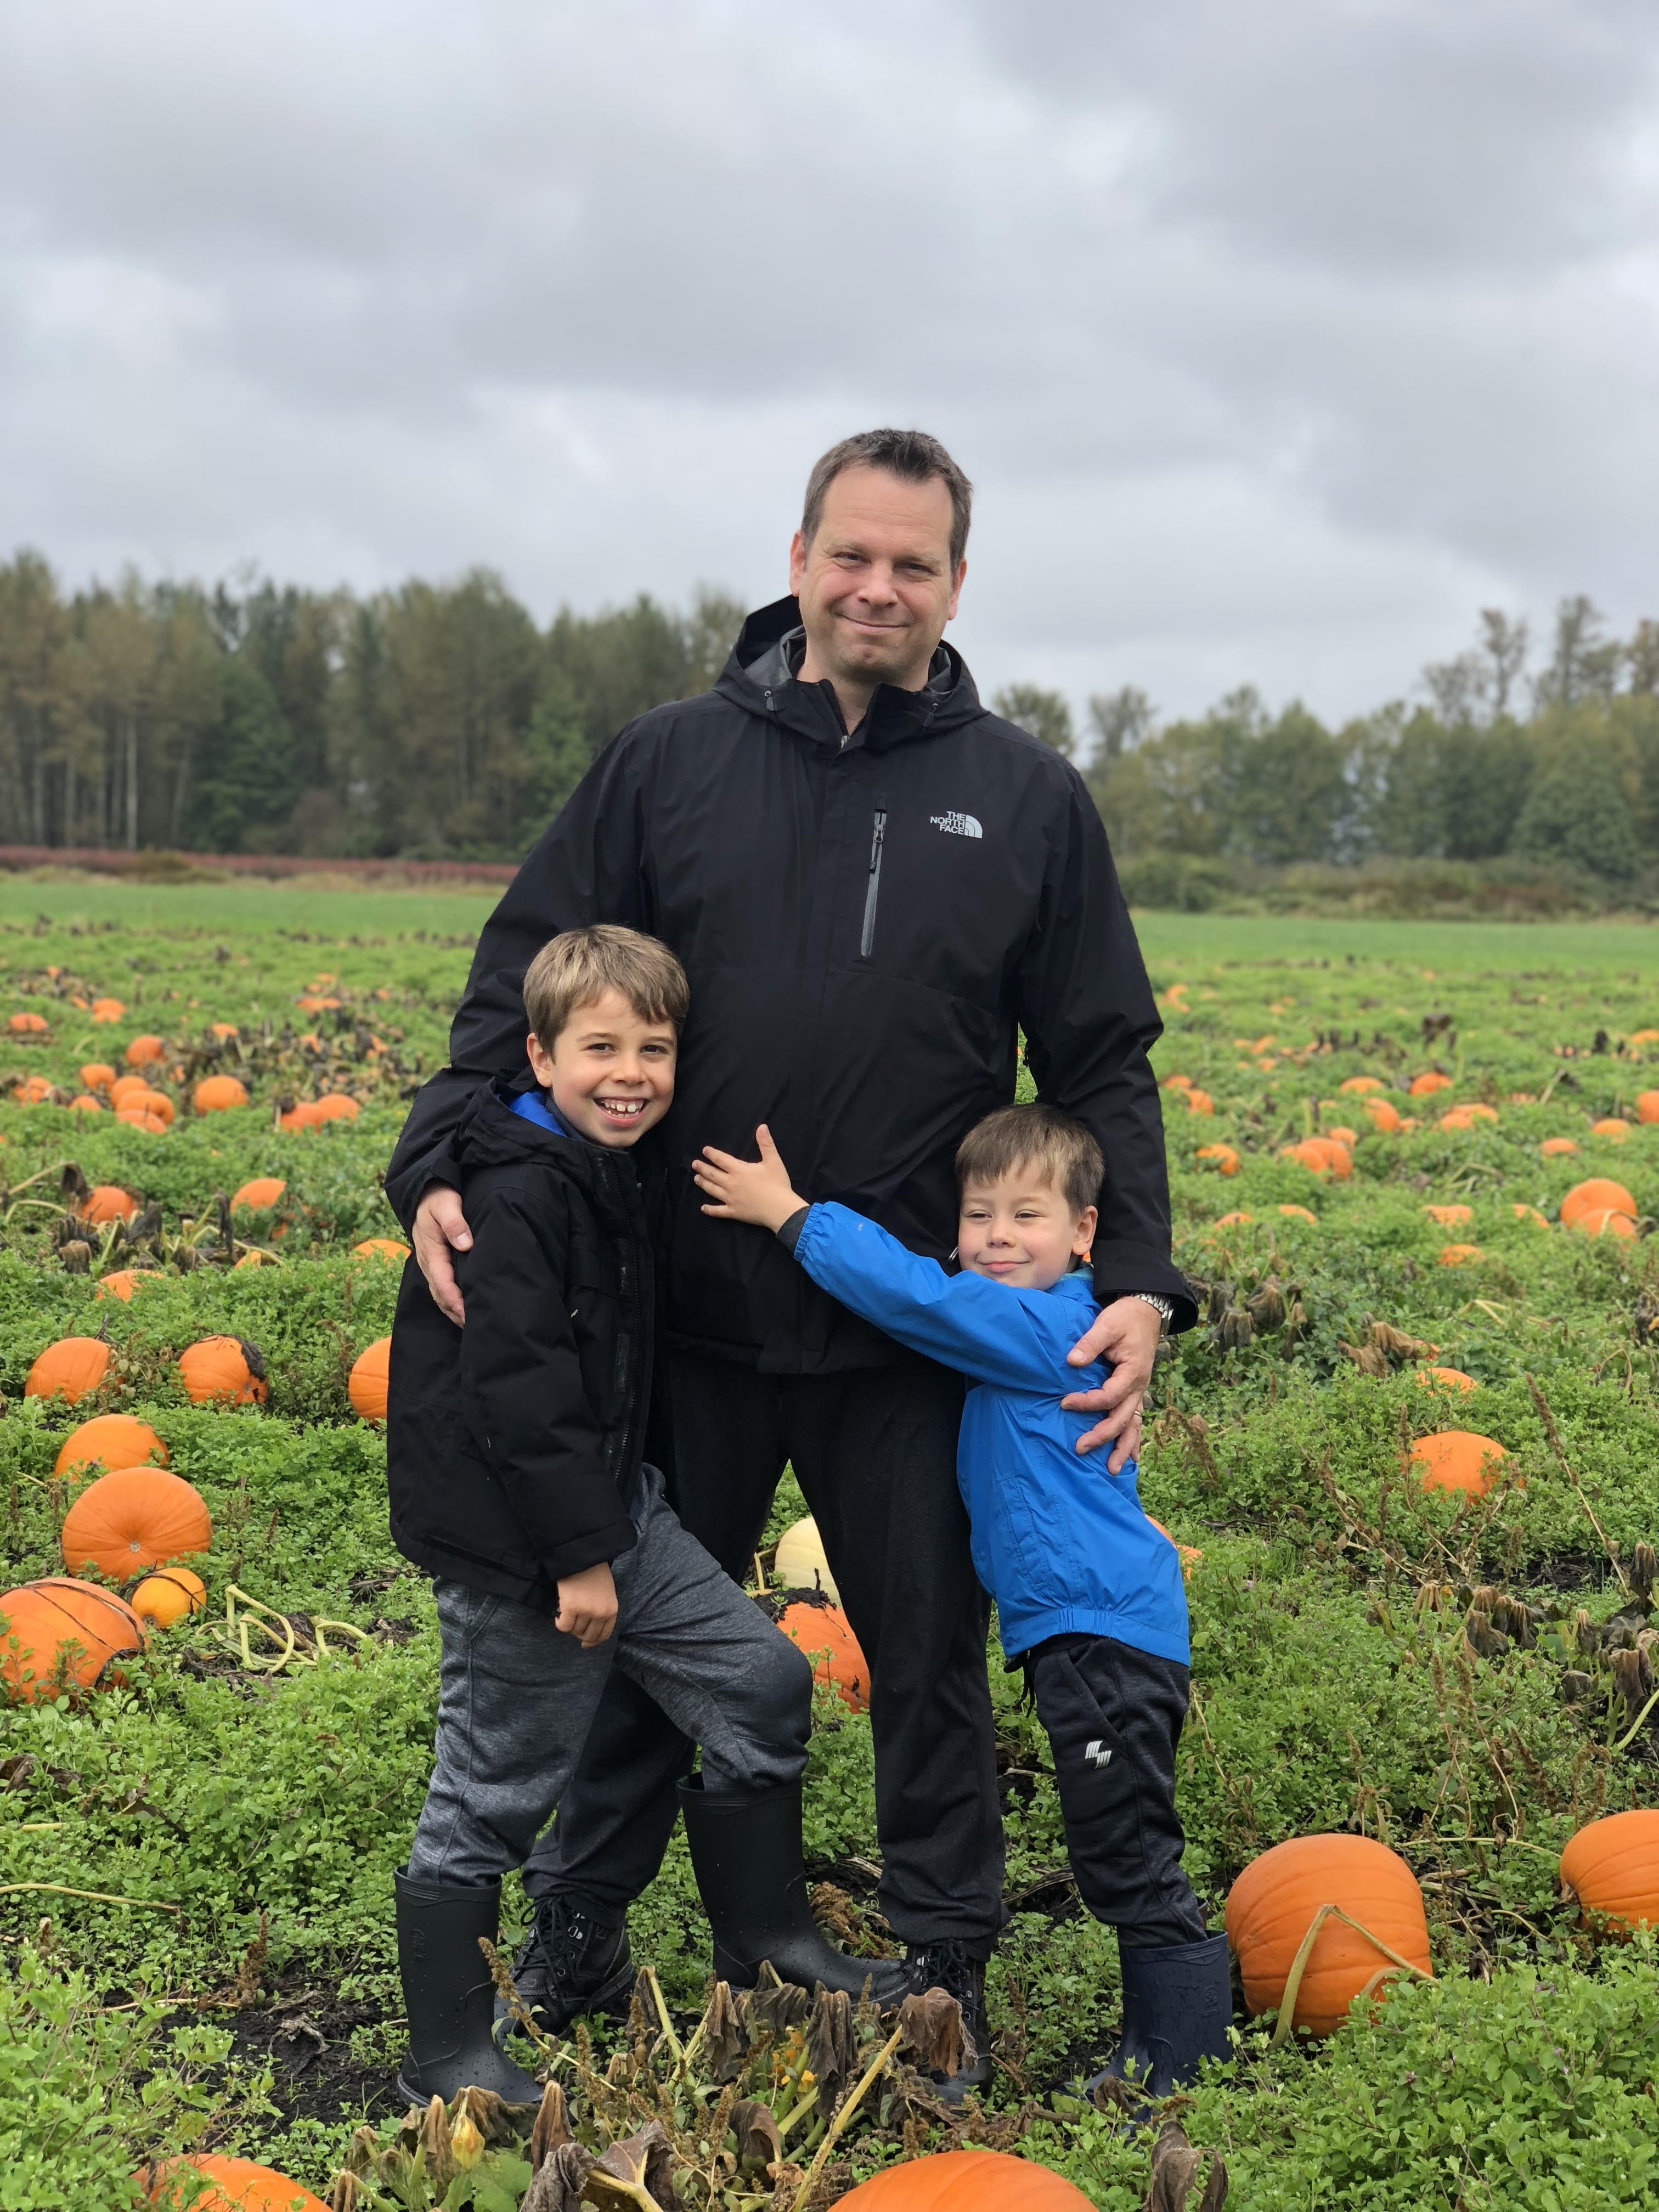 Our Yearly Visit to the Laity Pumpkin Patch in Maple Ridge, BC